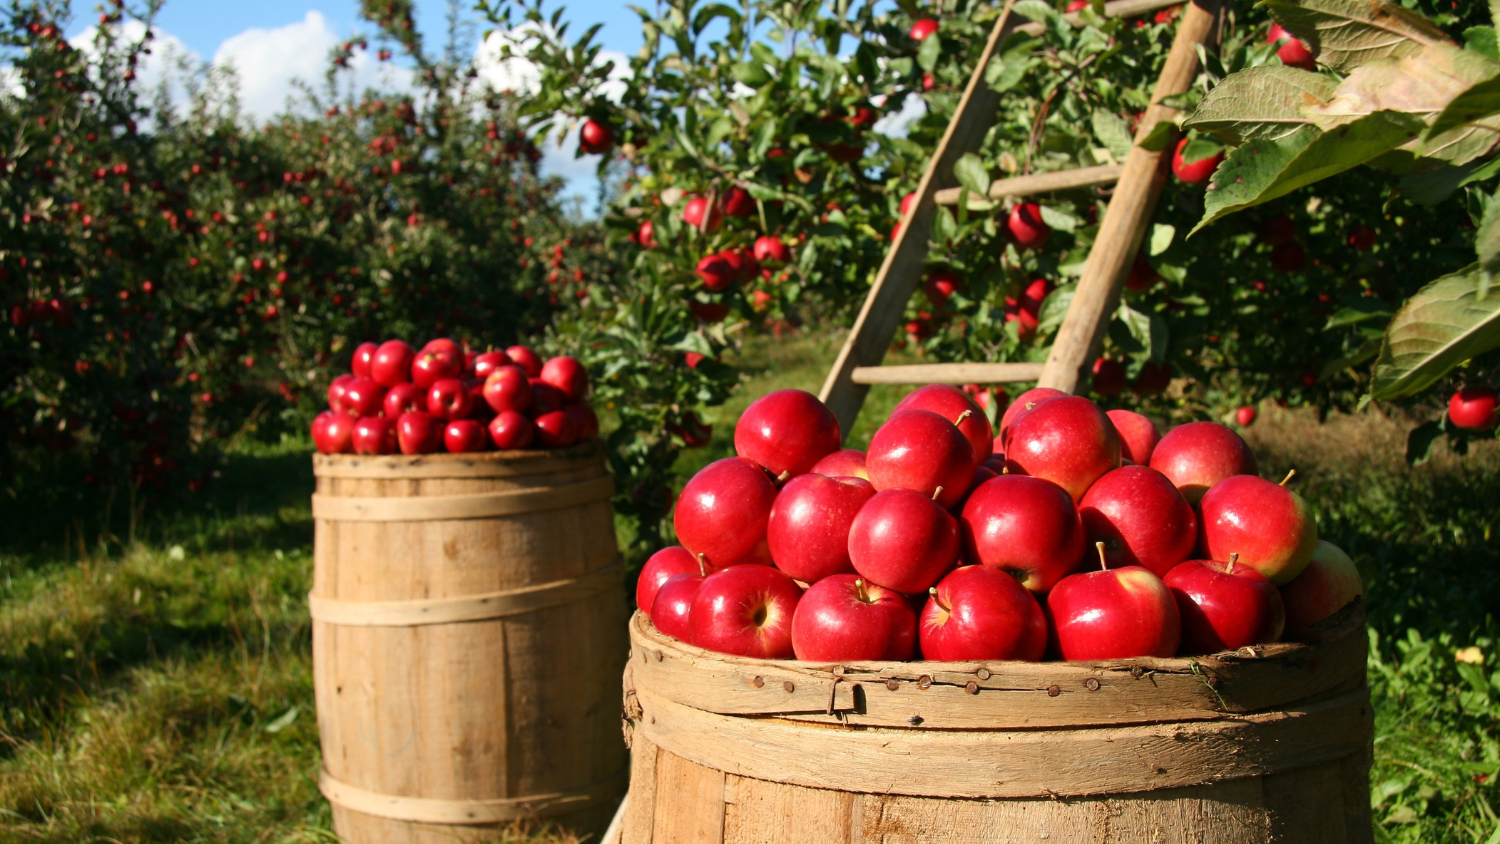 two bushels of apples in an orchard